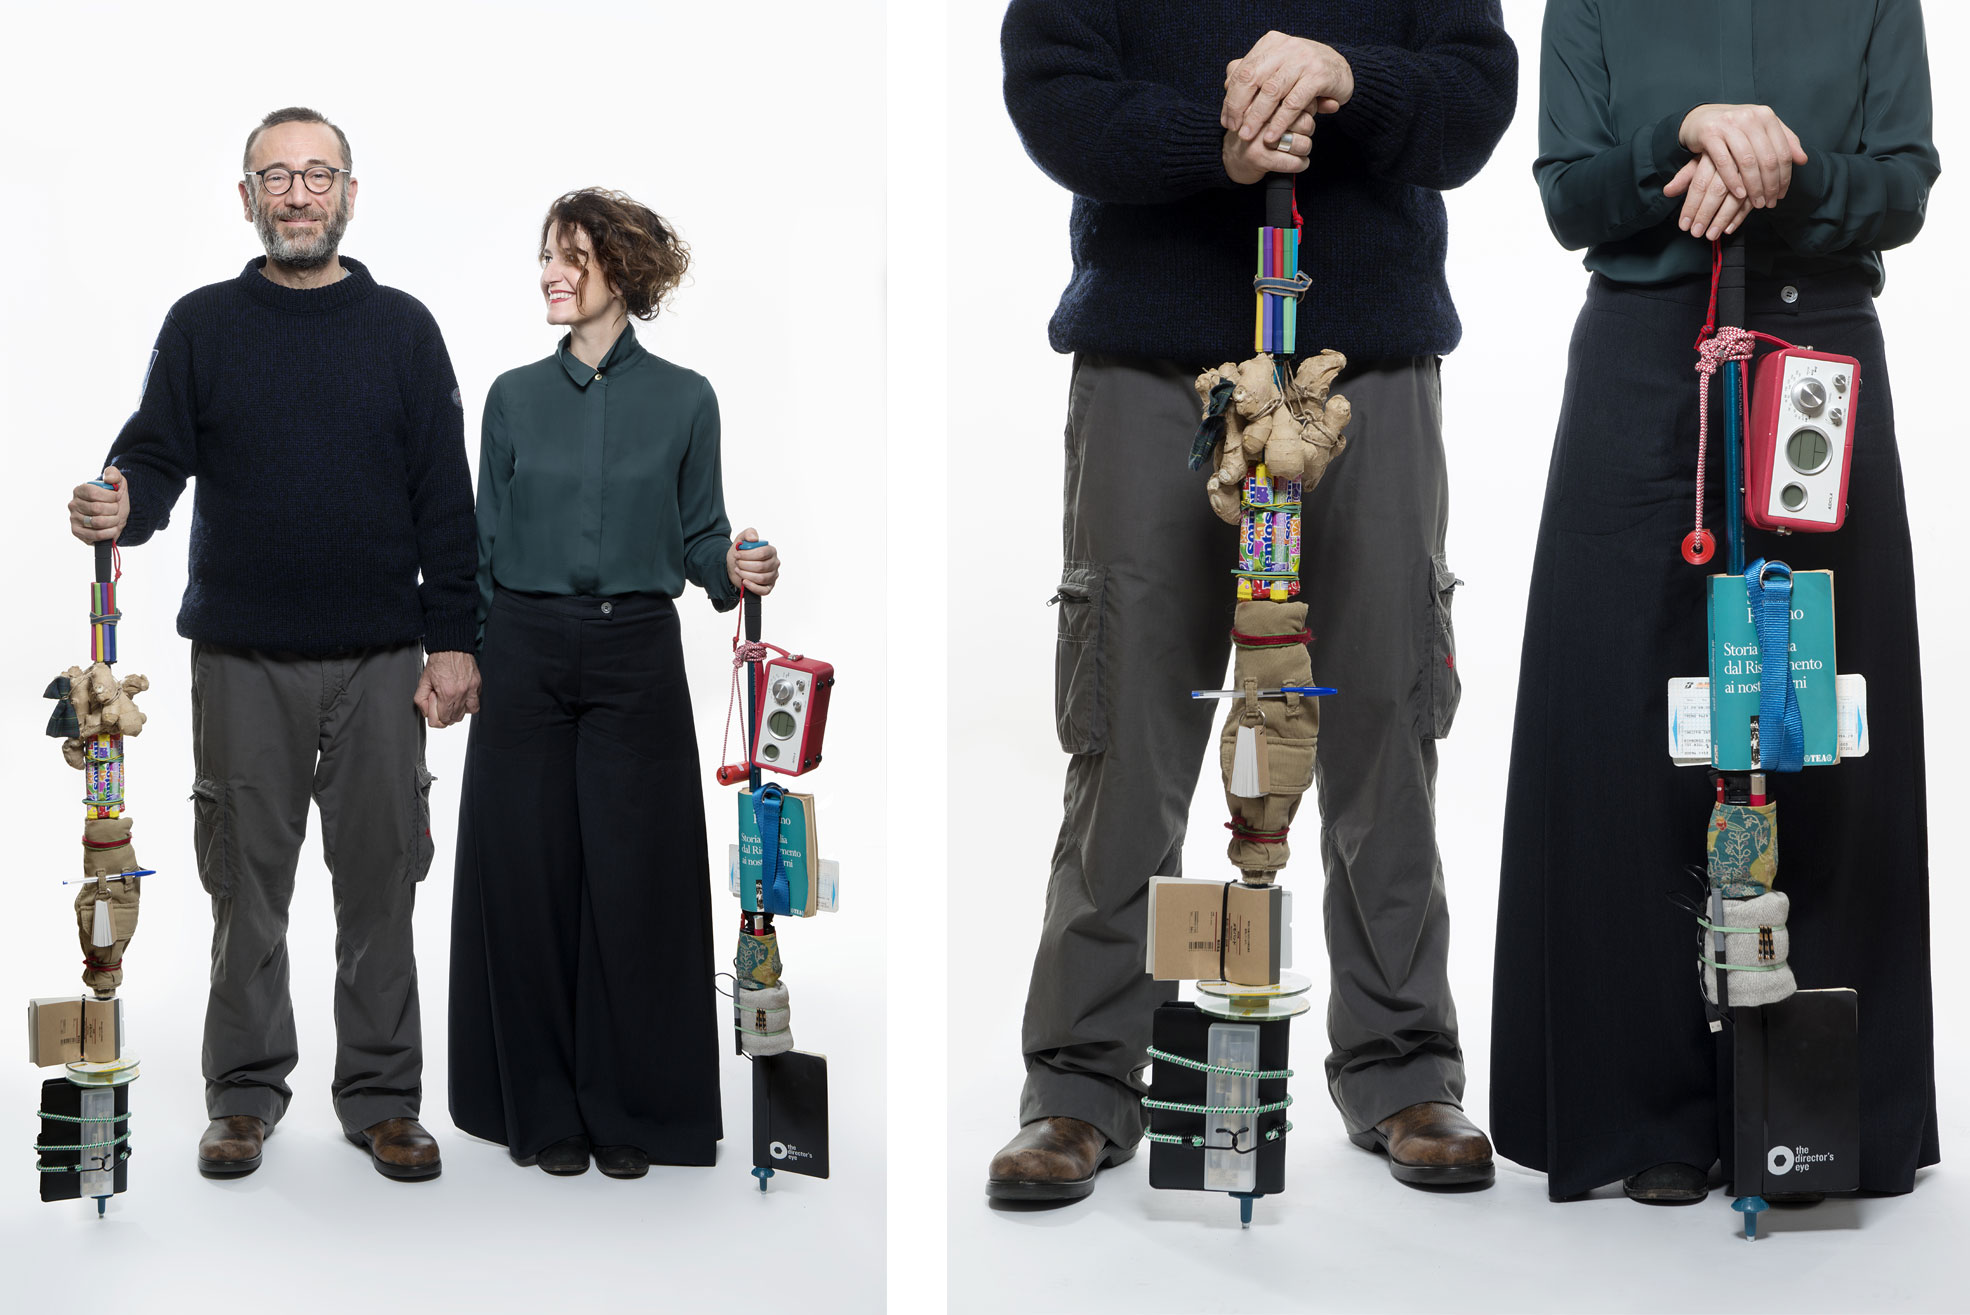 Photo of a couple with objects on their arms, the picture is part of Wearable Homes a design project by Denise Bonapace